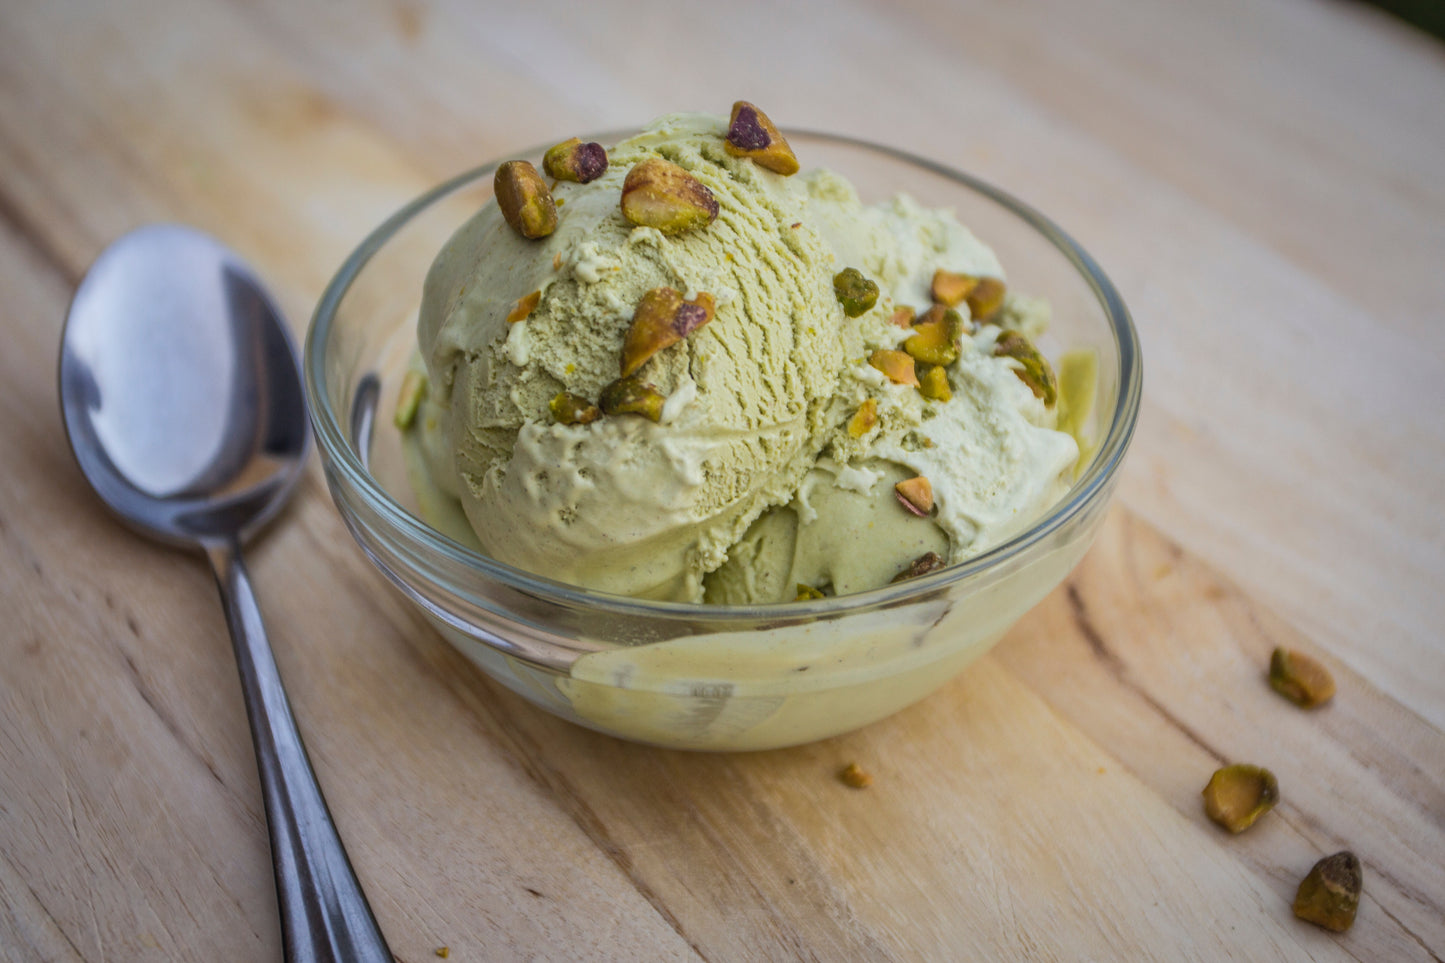 Satisfy Your Sweet Tooth with These Delicious Lactose-Free Vegan Ice Cream Recipes